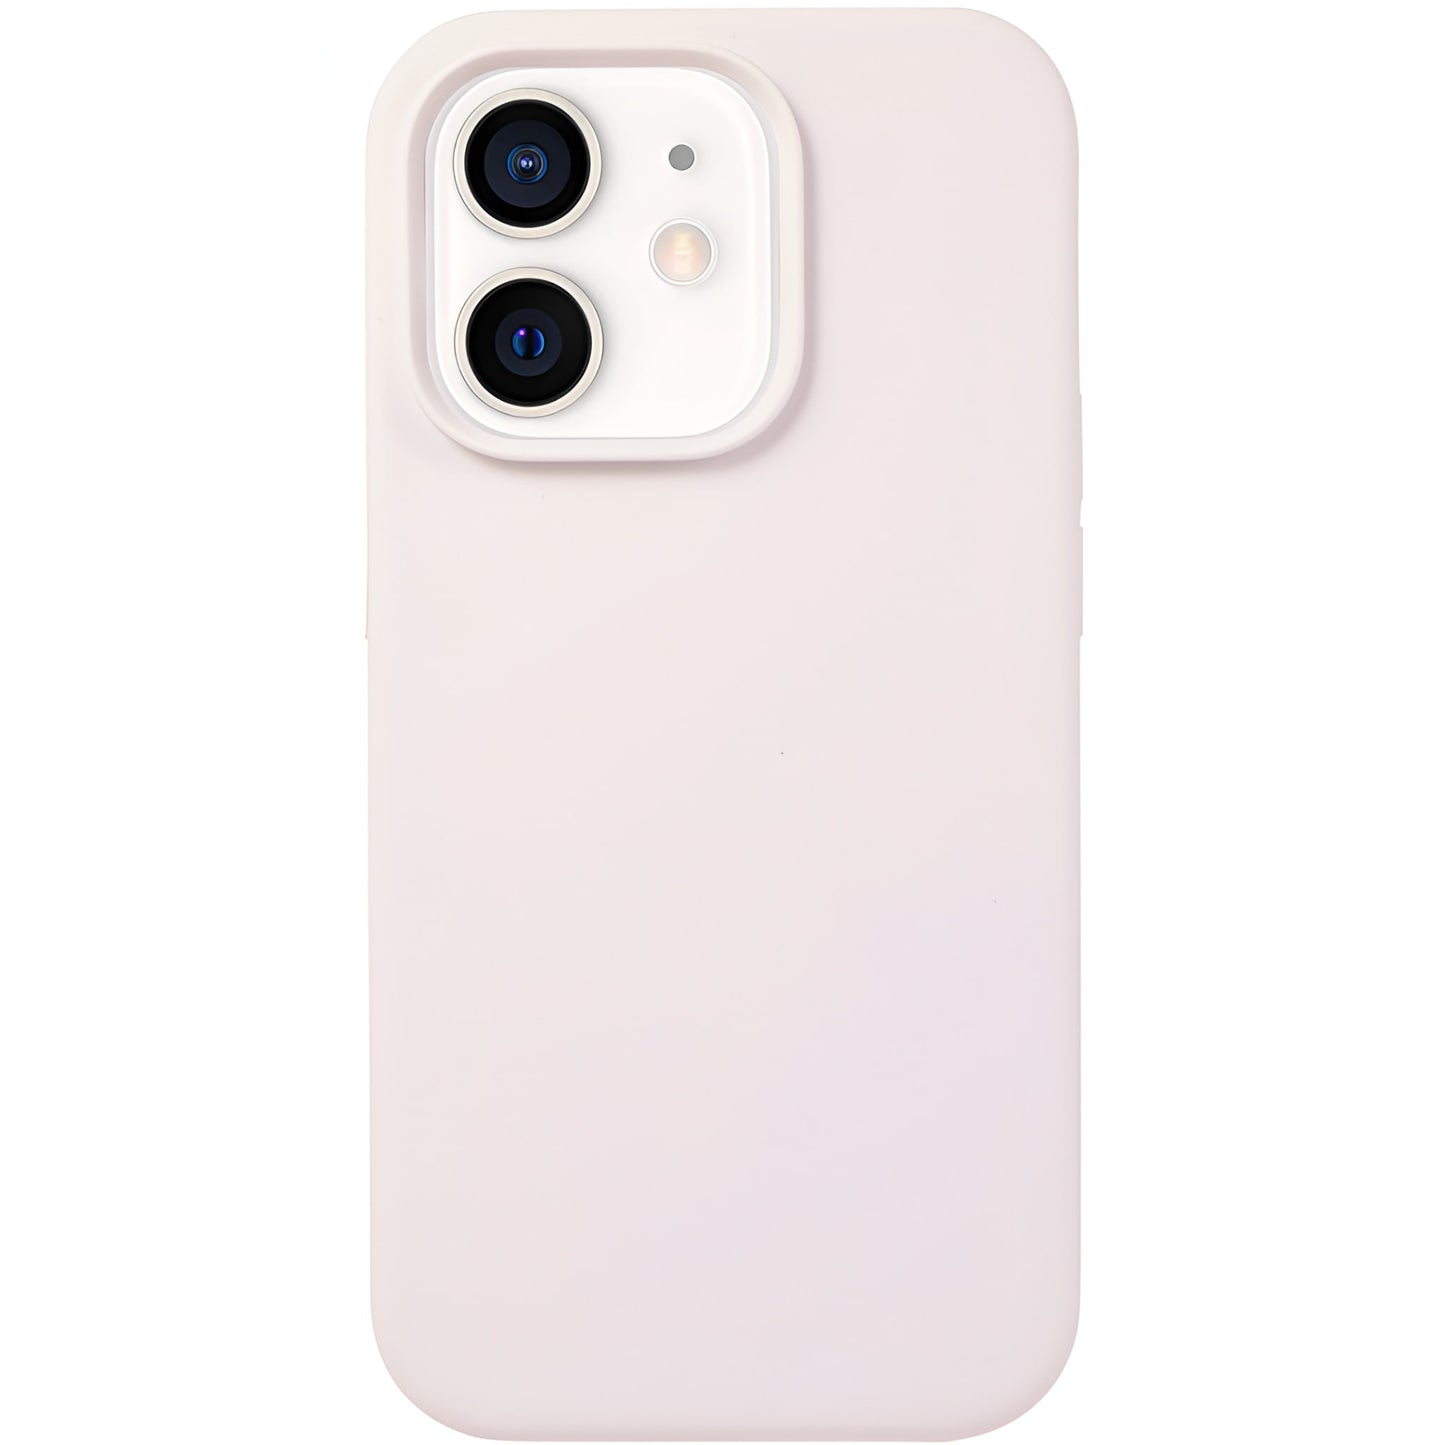 Colour Sky (Light Grey) - Phone Case For iPhone 12